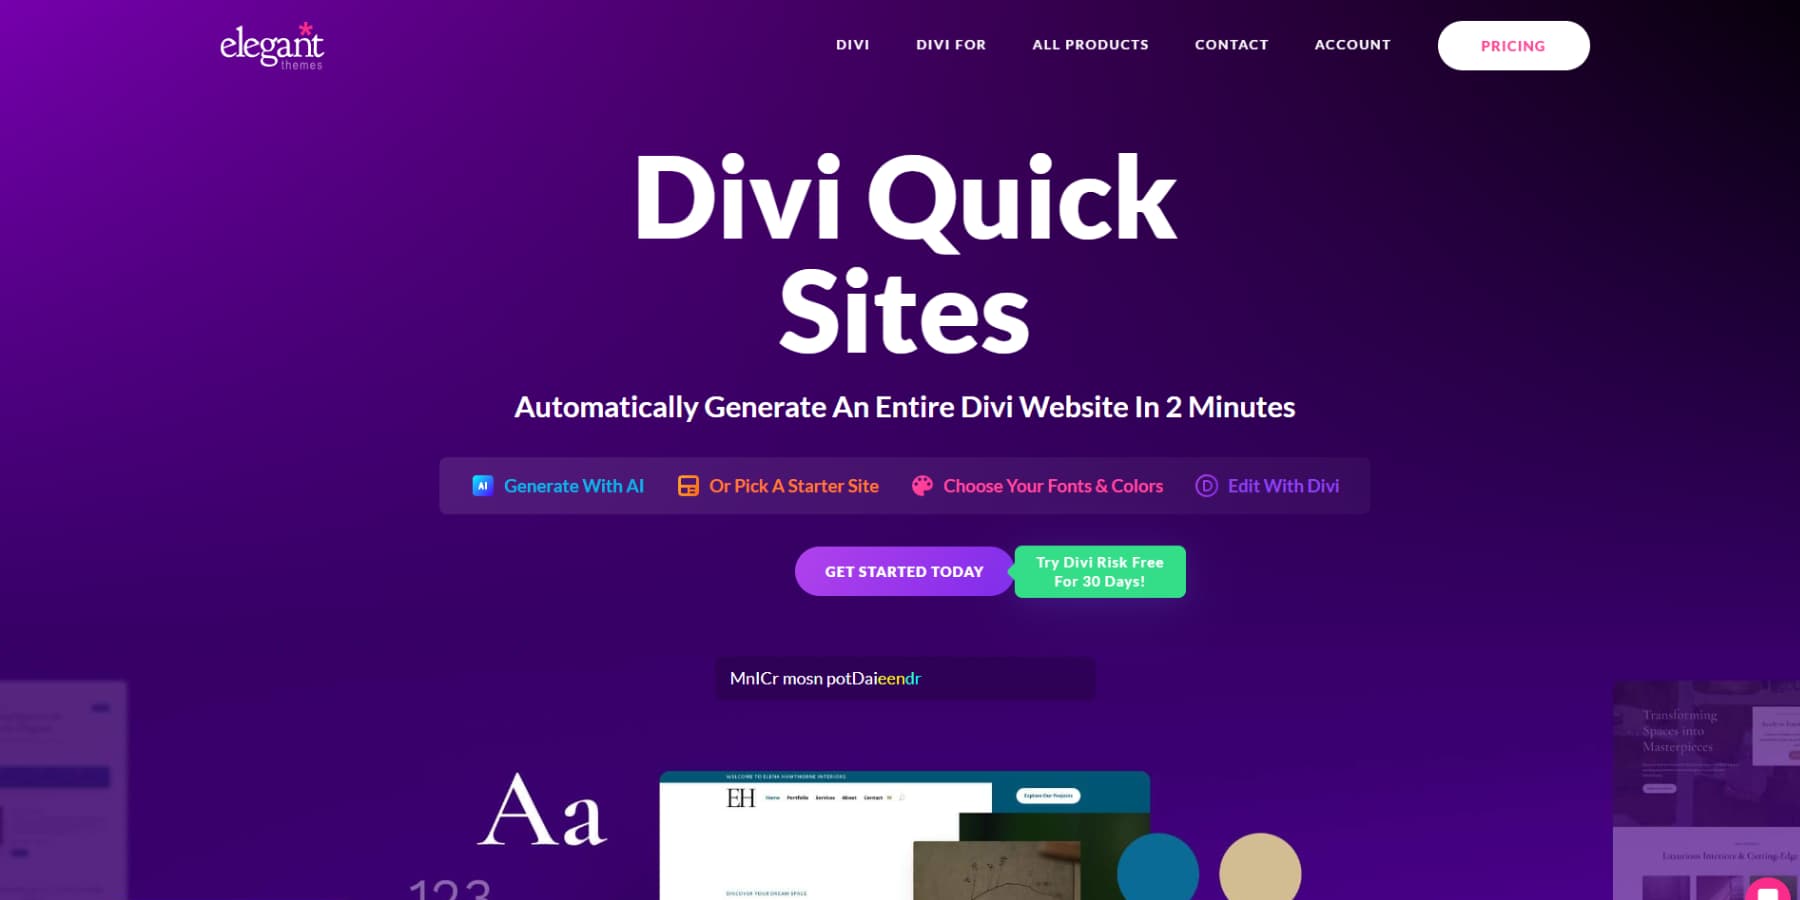 A screenshot of Divi Quick Sites' home page